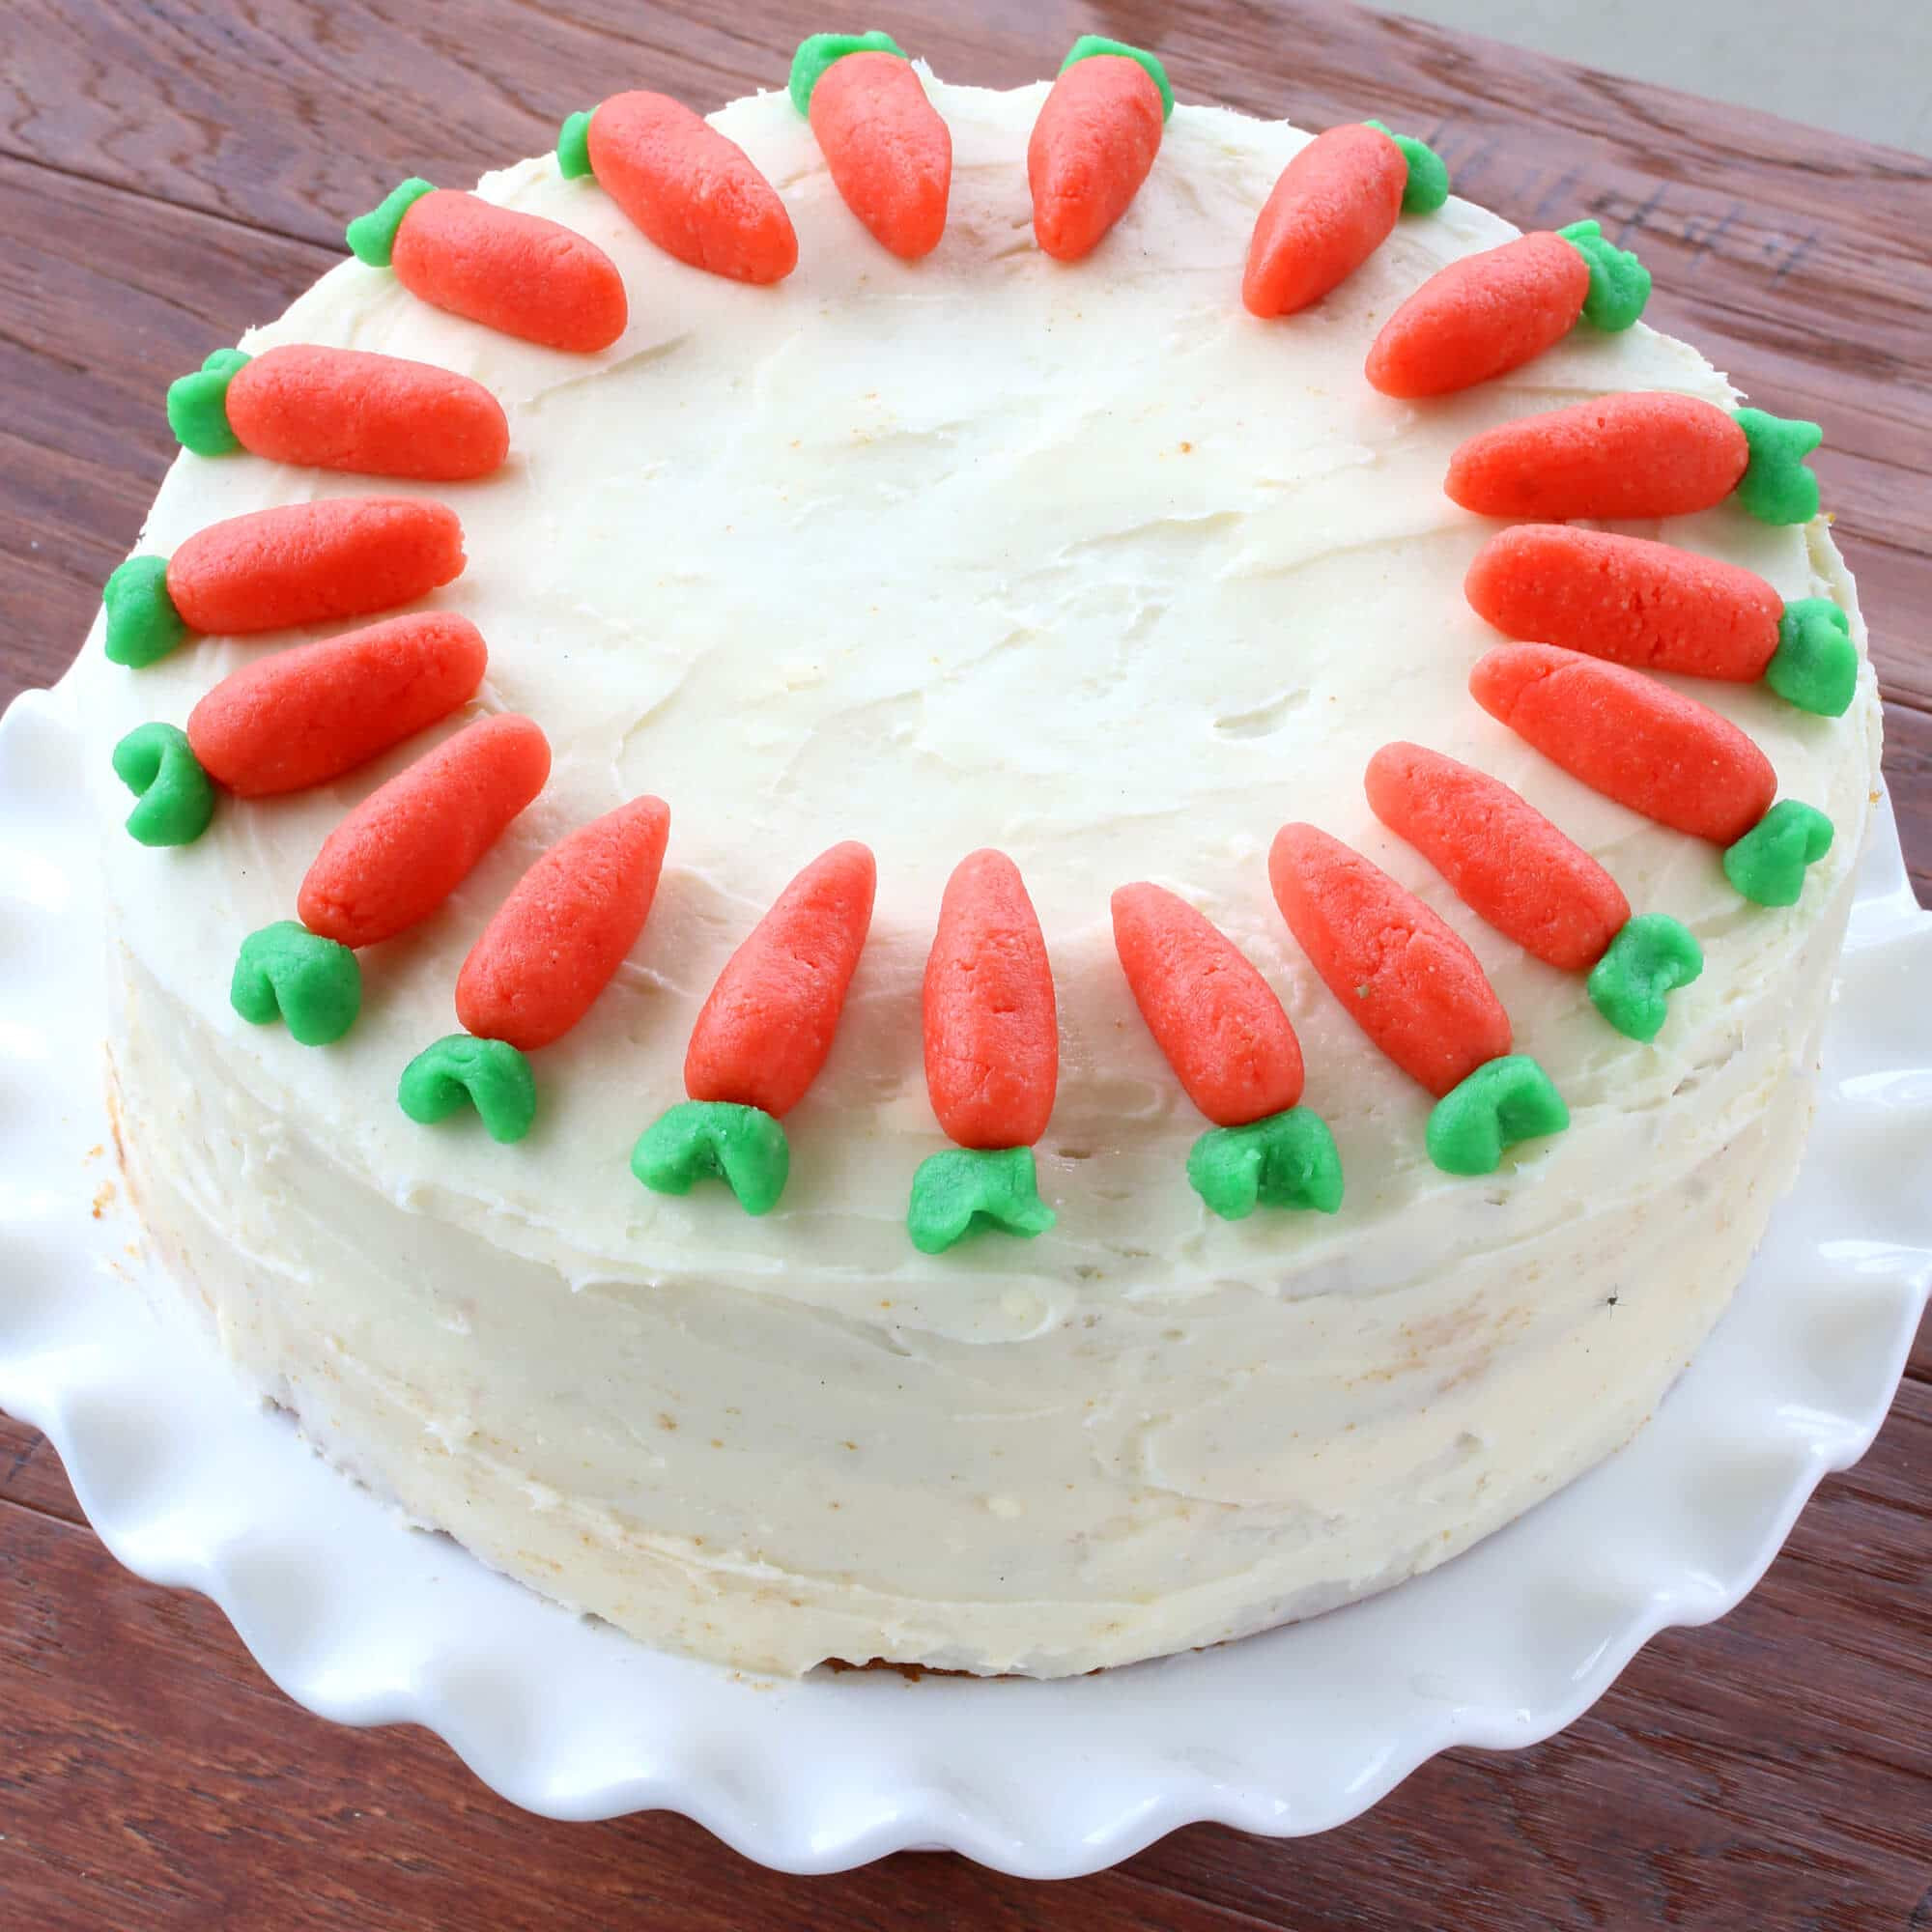 Gourmet Carrot Cake Recipes
 Best Gluten Free Carrot Cake with Marzipan Carrots The